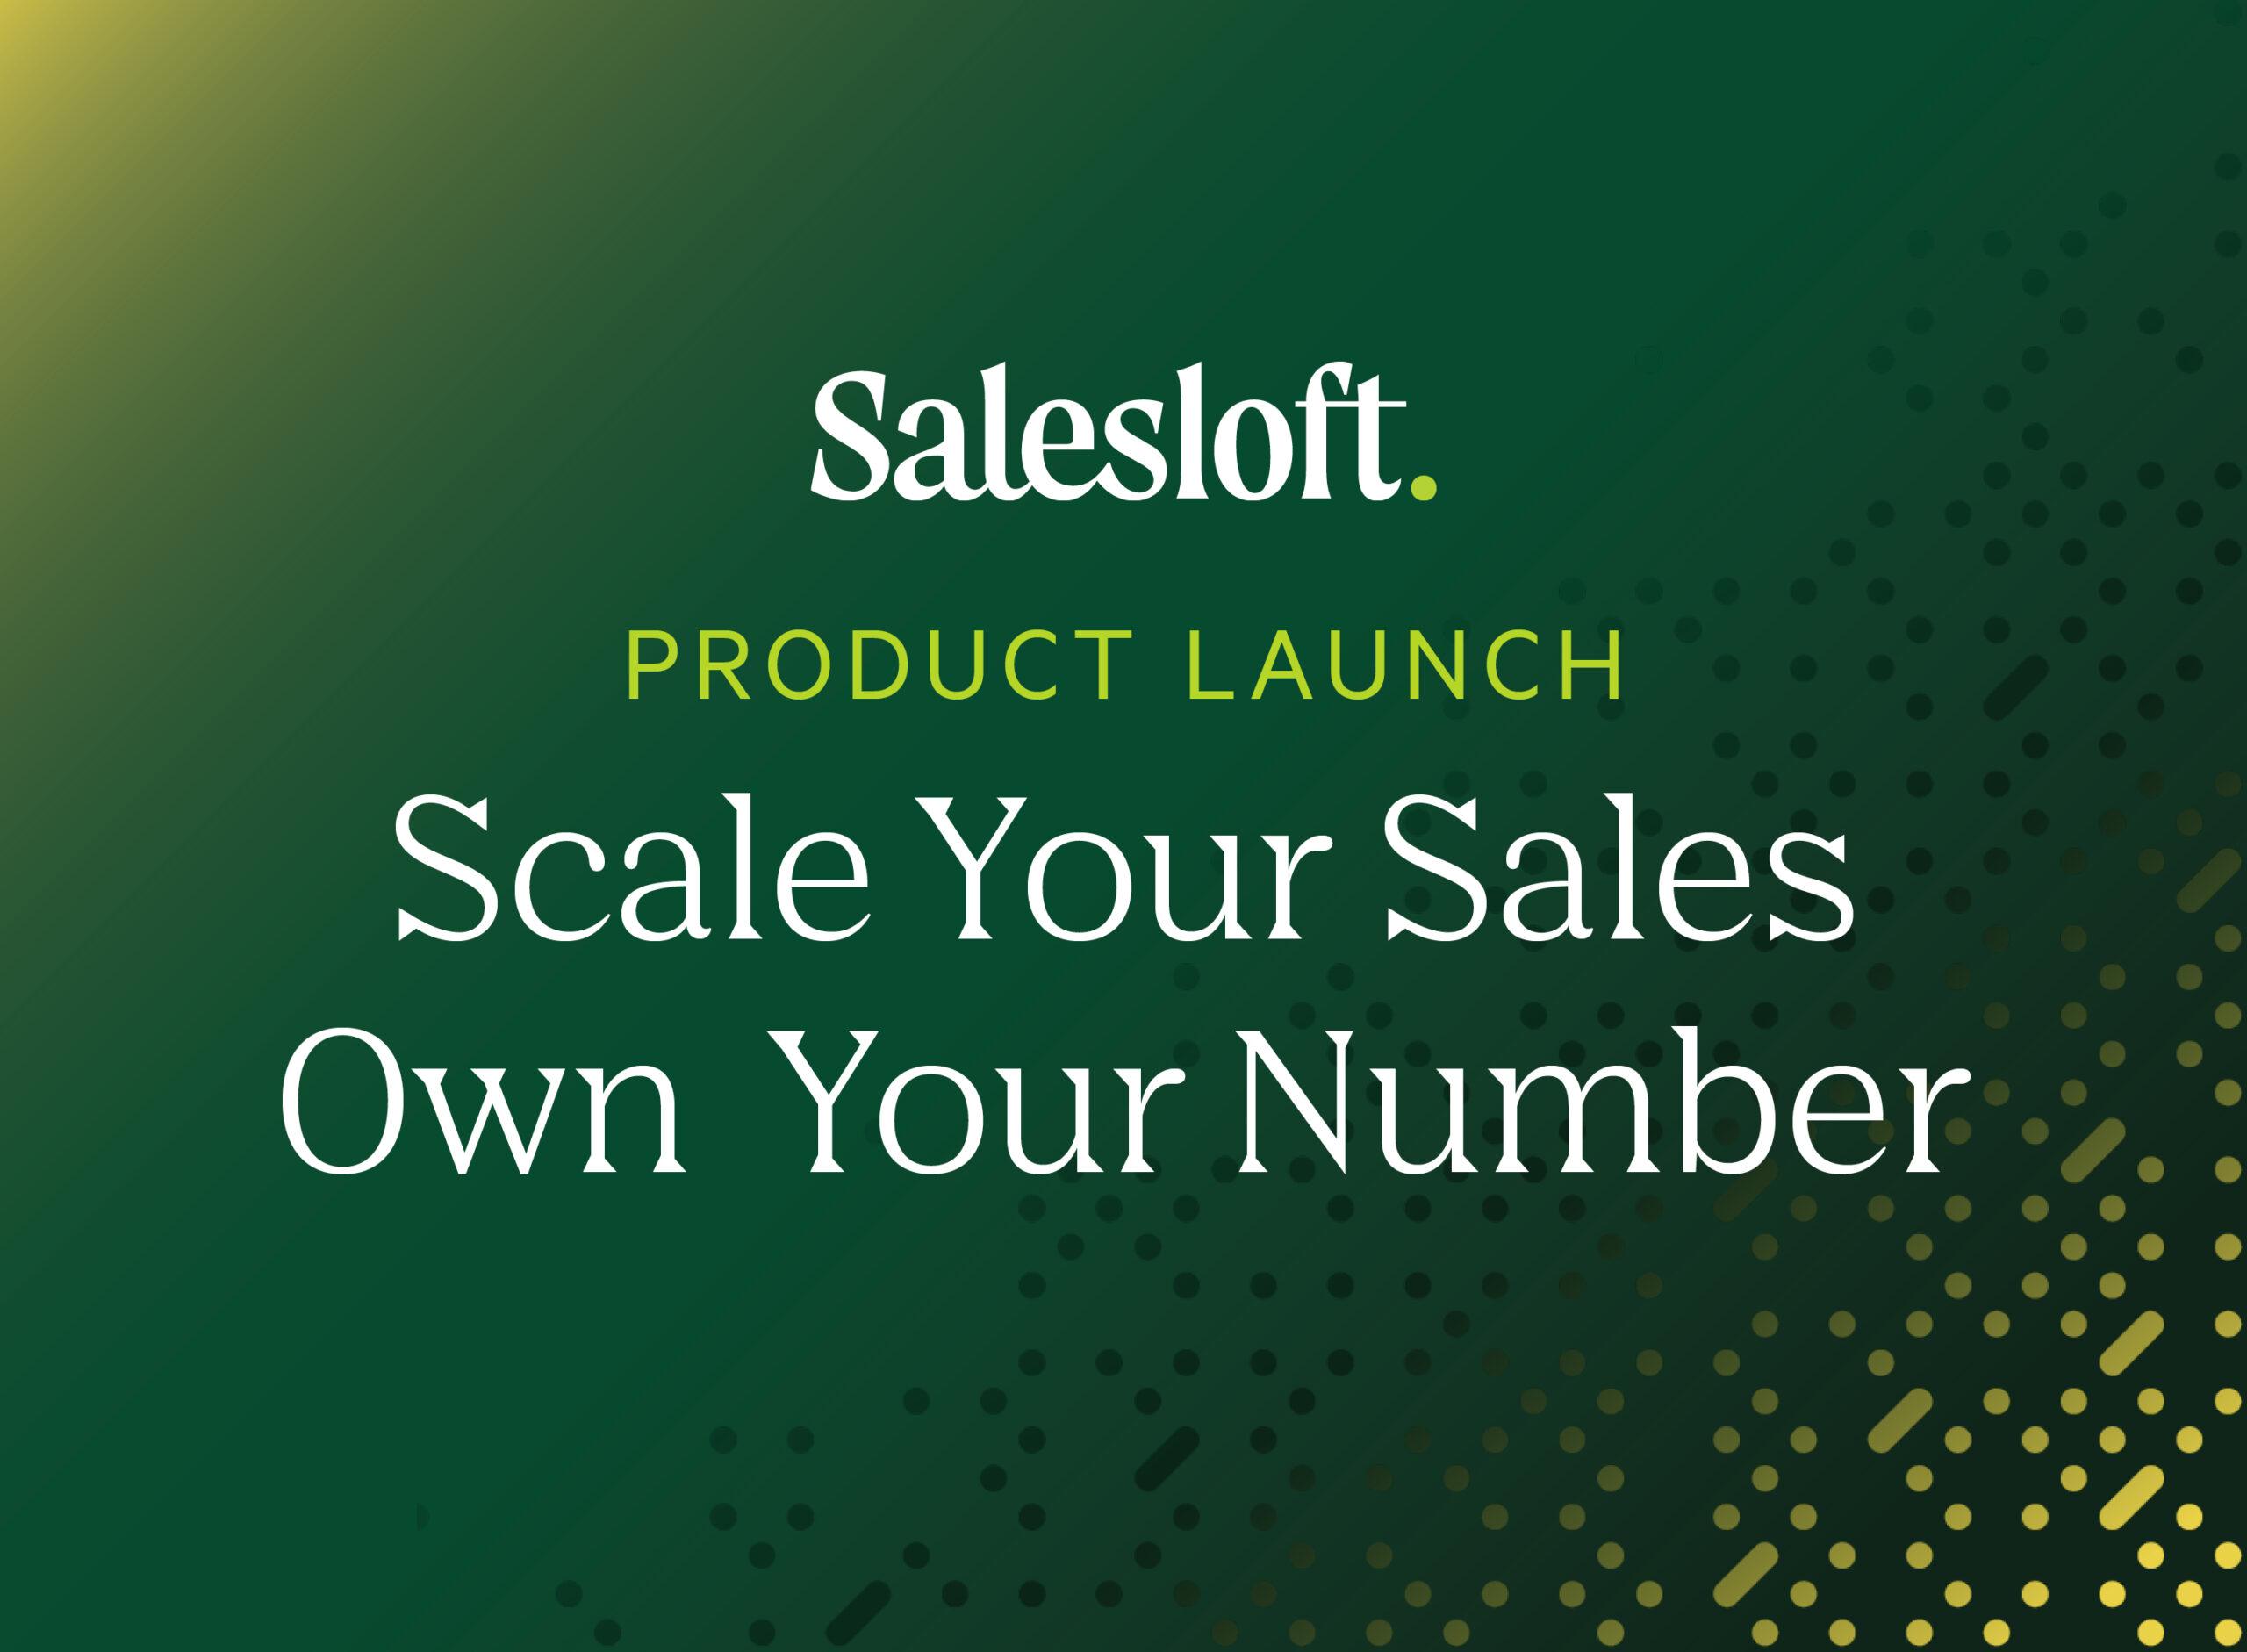 "Scale your sales, Own your number"